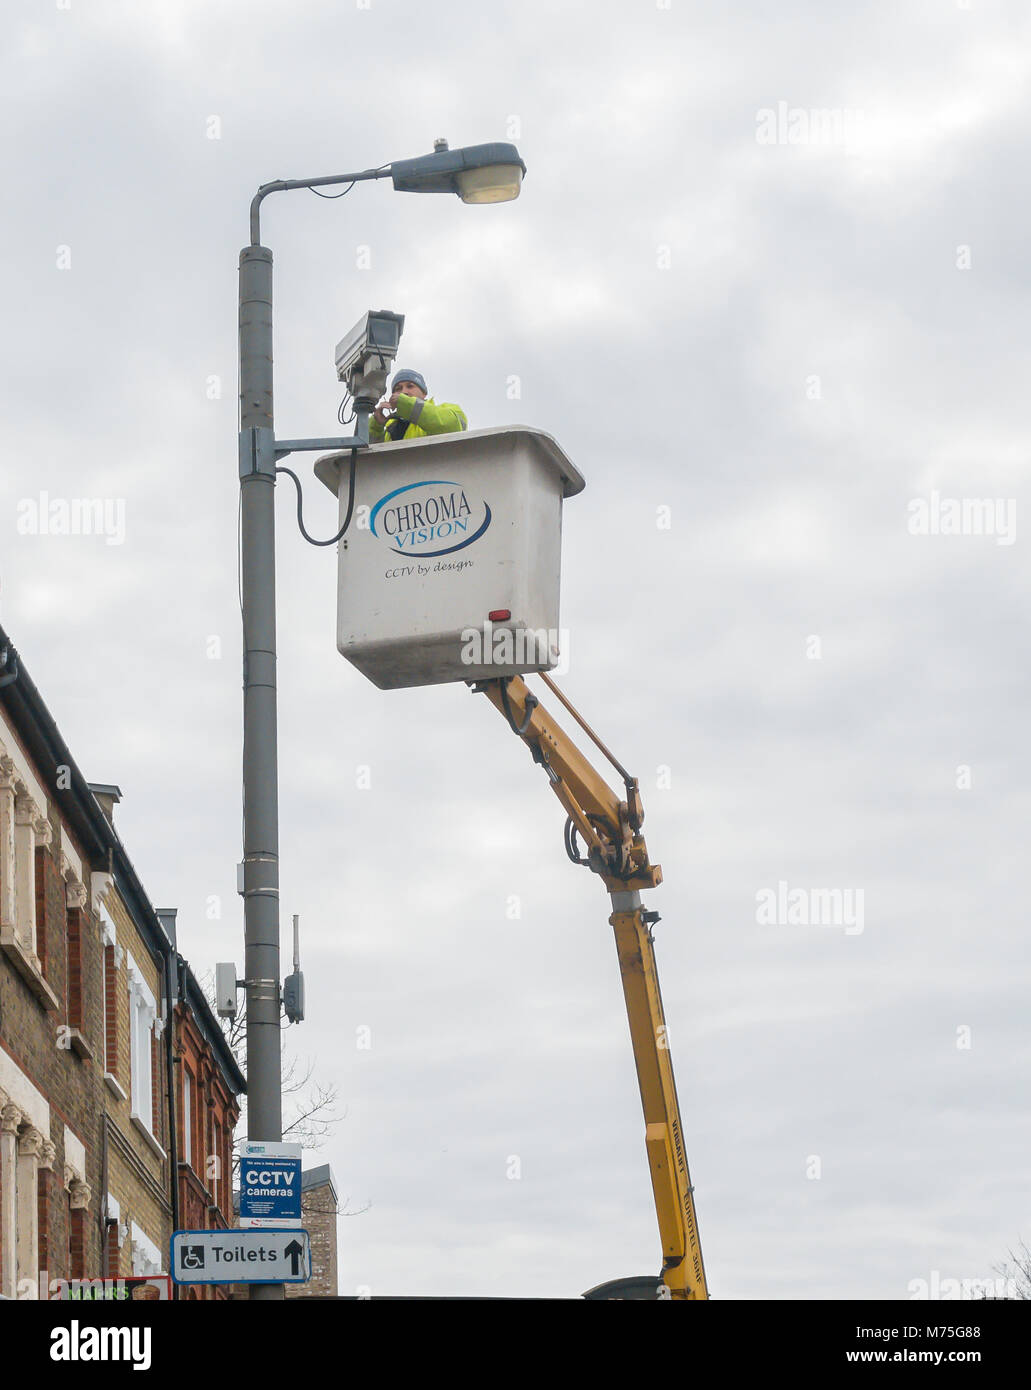 A CCTV camera being installed by a maintenance crew in Earlsfield, London Stock Photo